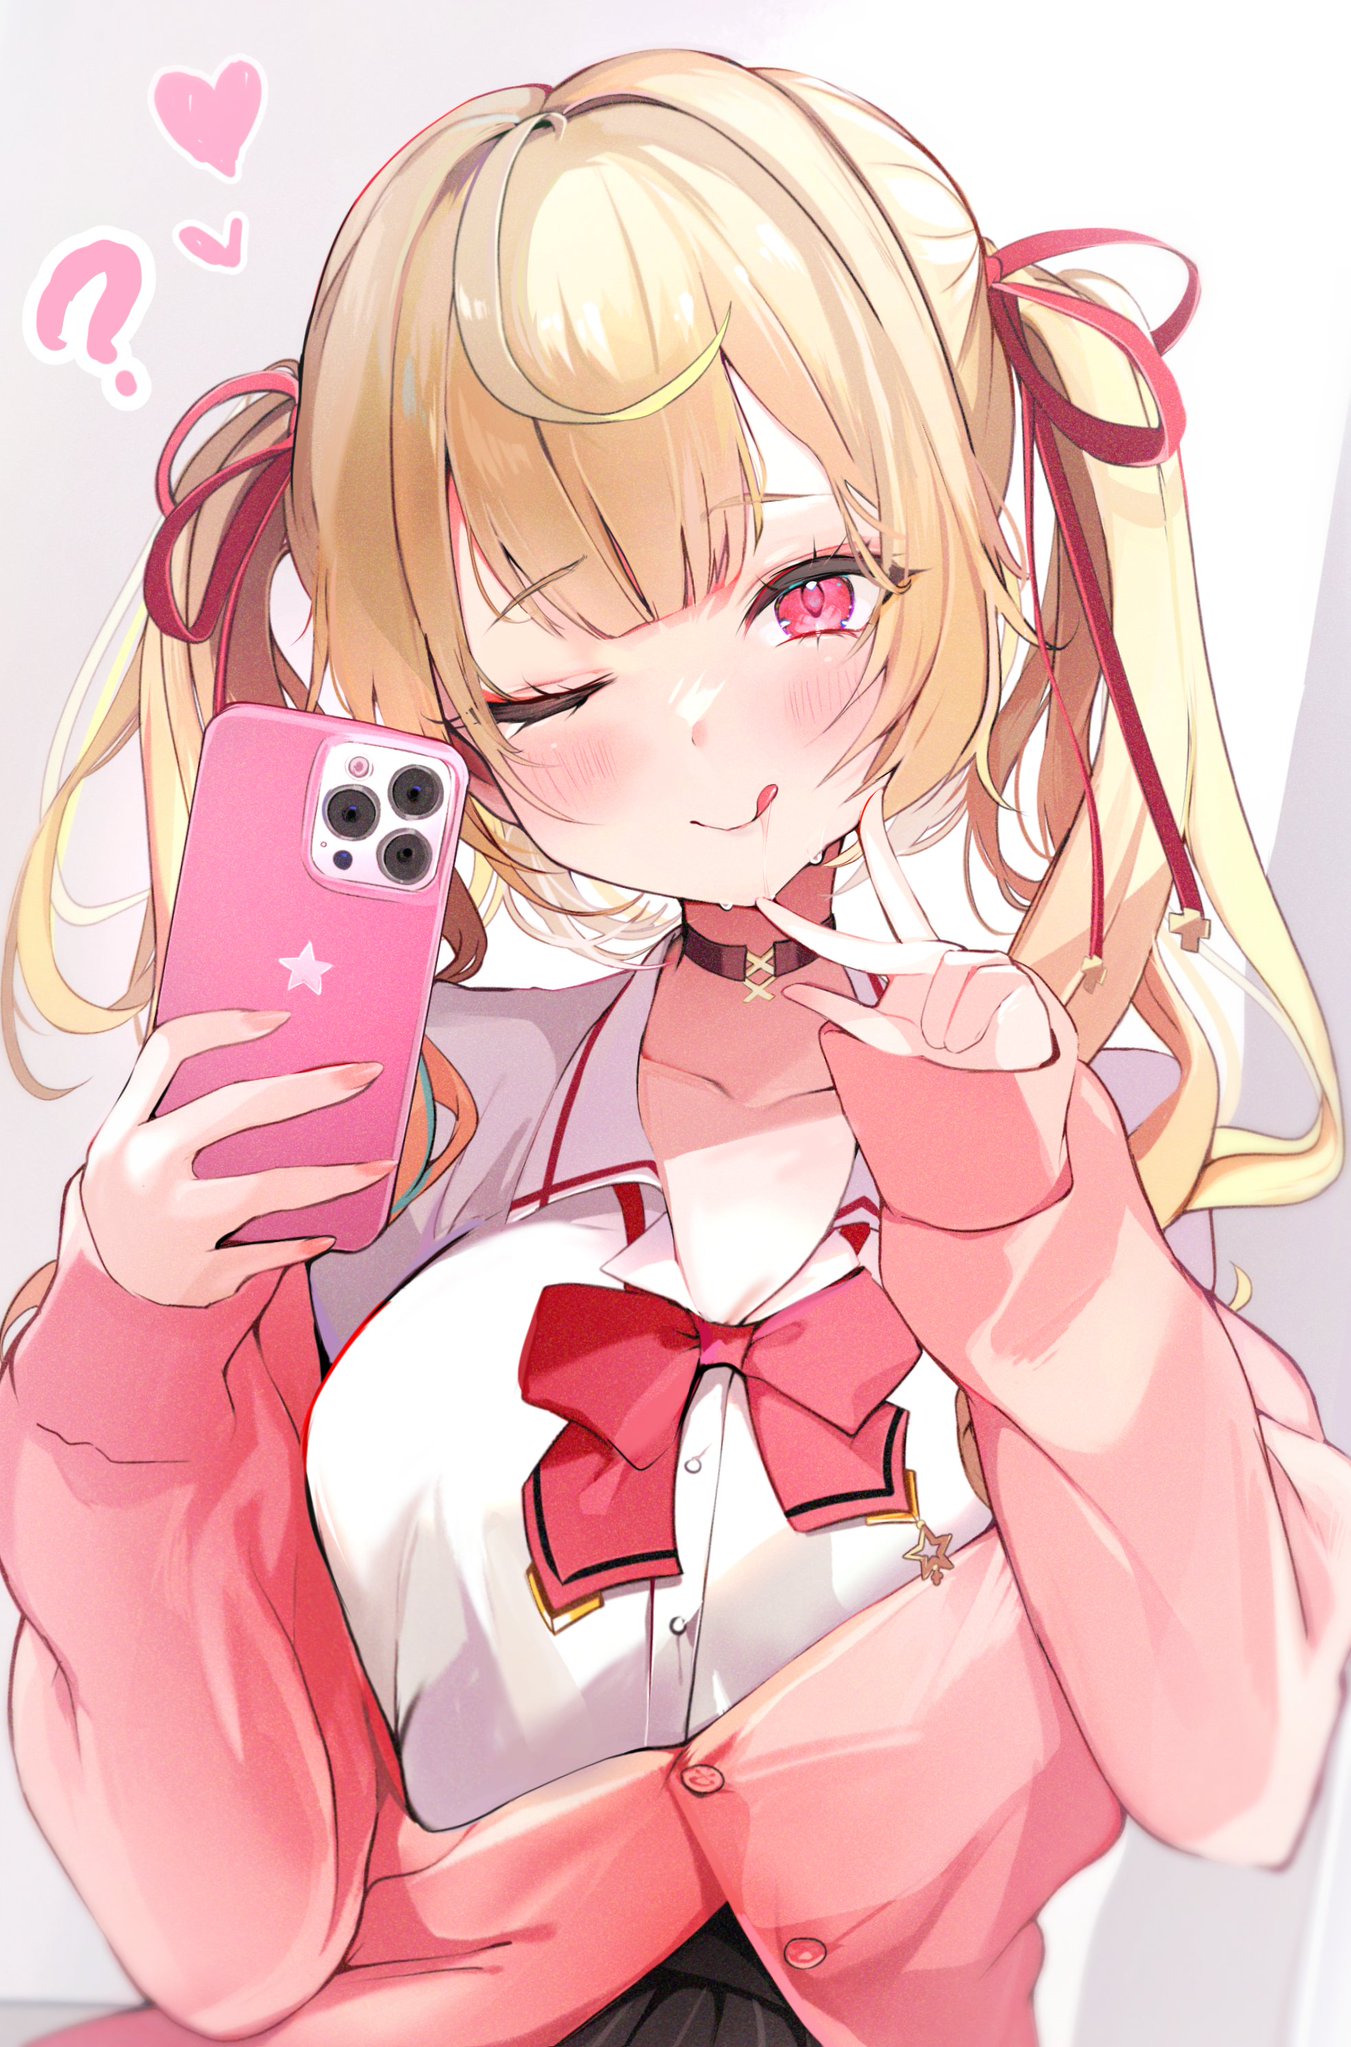 Anime Anime Girls One Eye Closed Blushing Choker Phone Blonde Red Eyes Heart Question Mark Bow Tie L 1351x2047